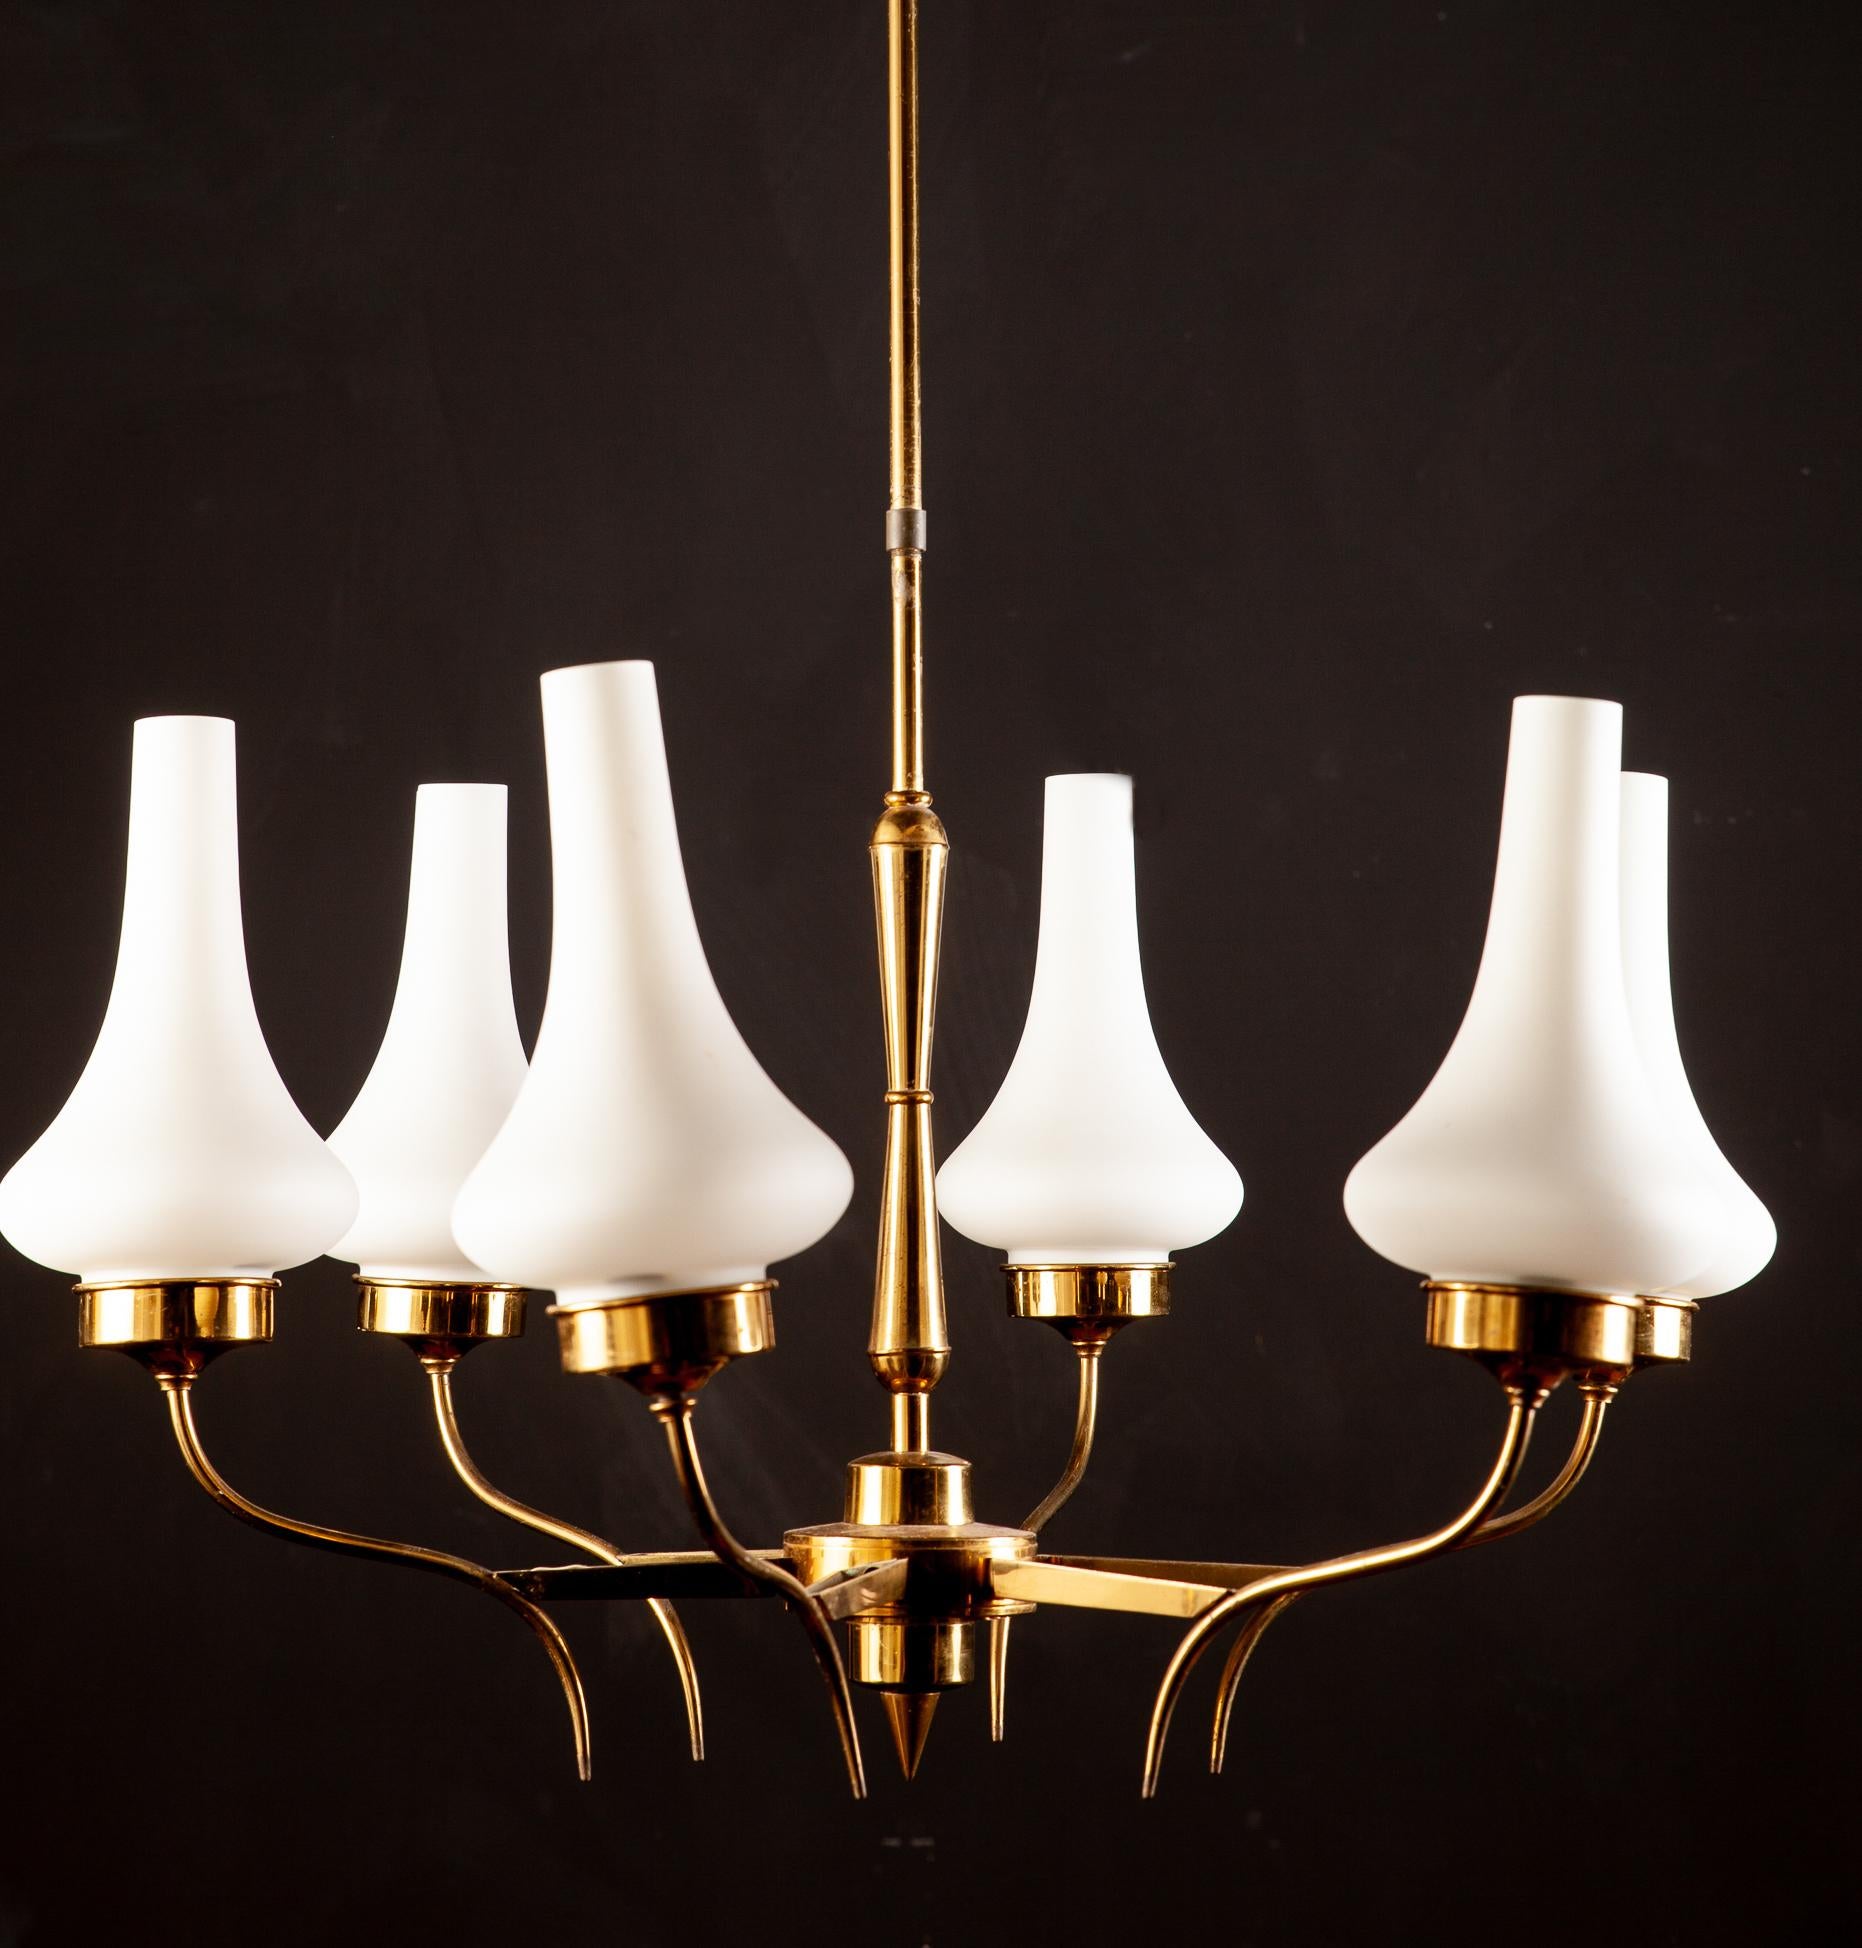 Arredoluce Attributed Midcentury Brass and Murano Glass Chandelier, Italy, 1958 For Sale 1